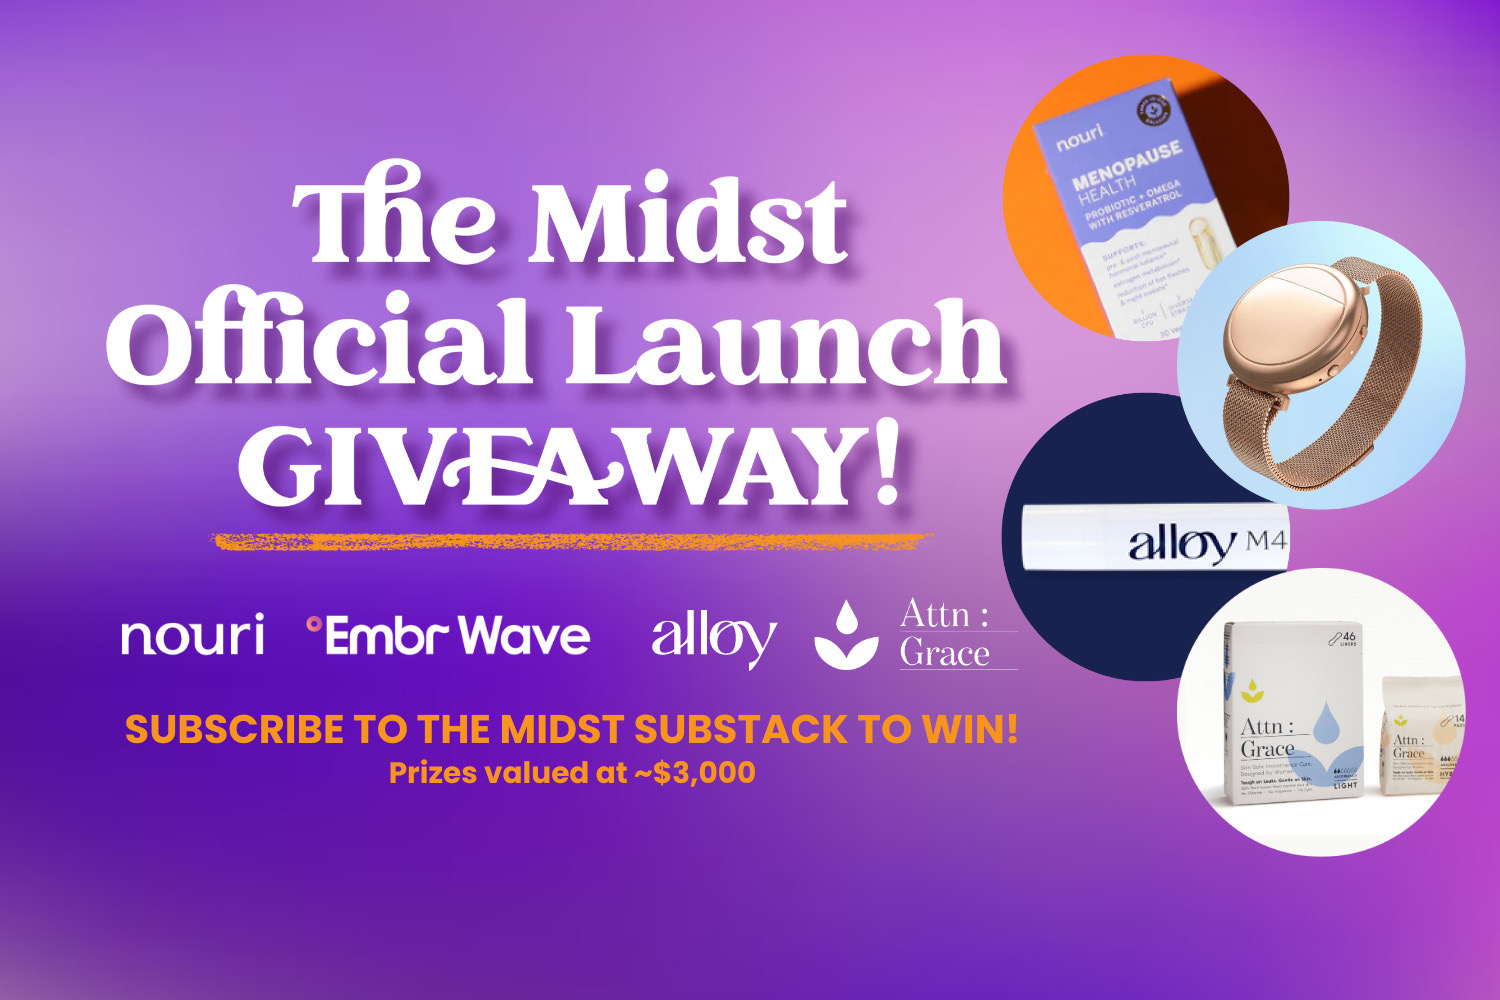 Enter to win prizes in The Midst official launch giveaway! - THE MIDST